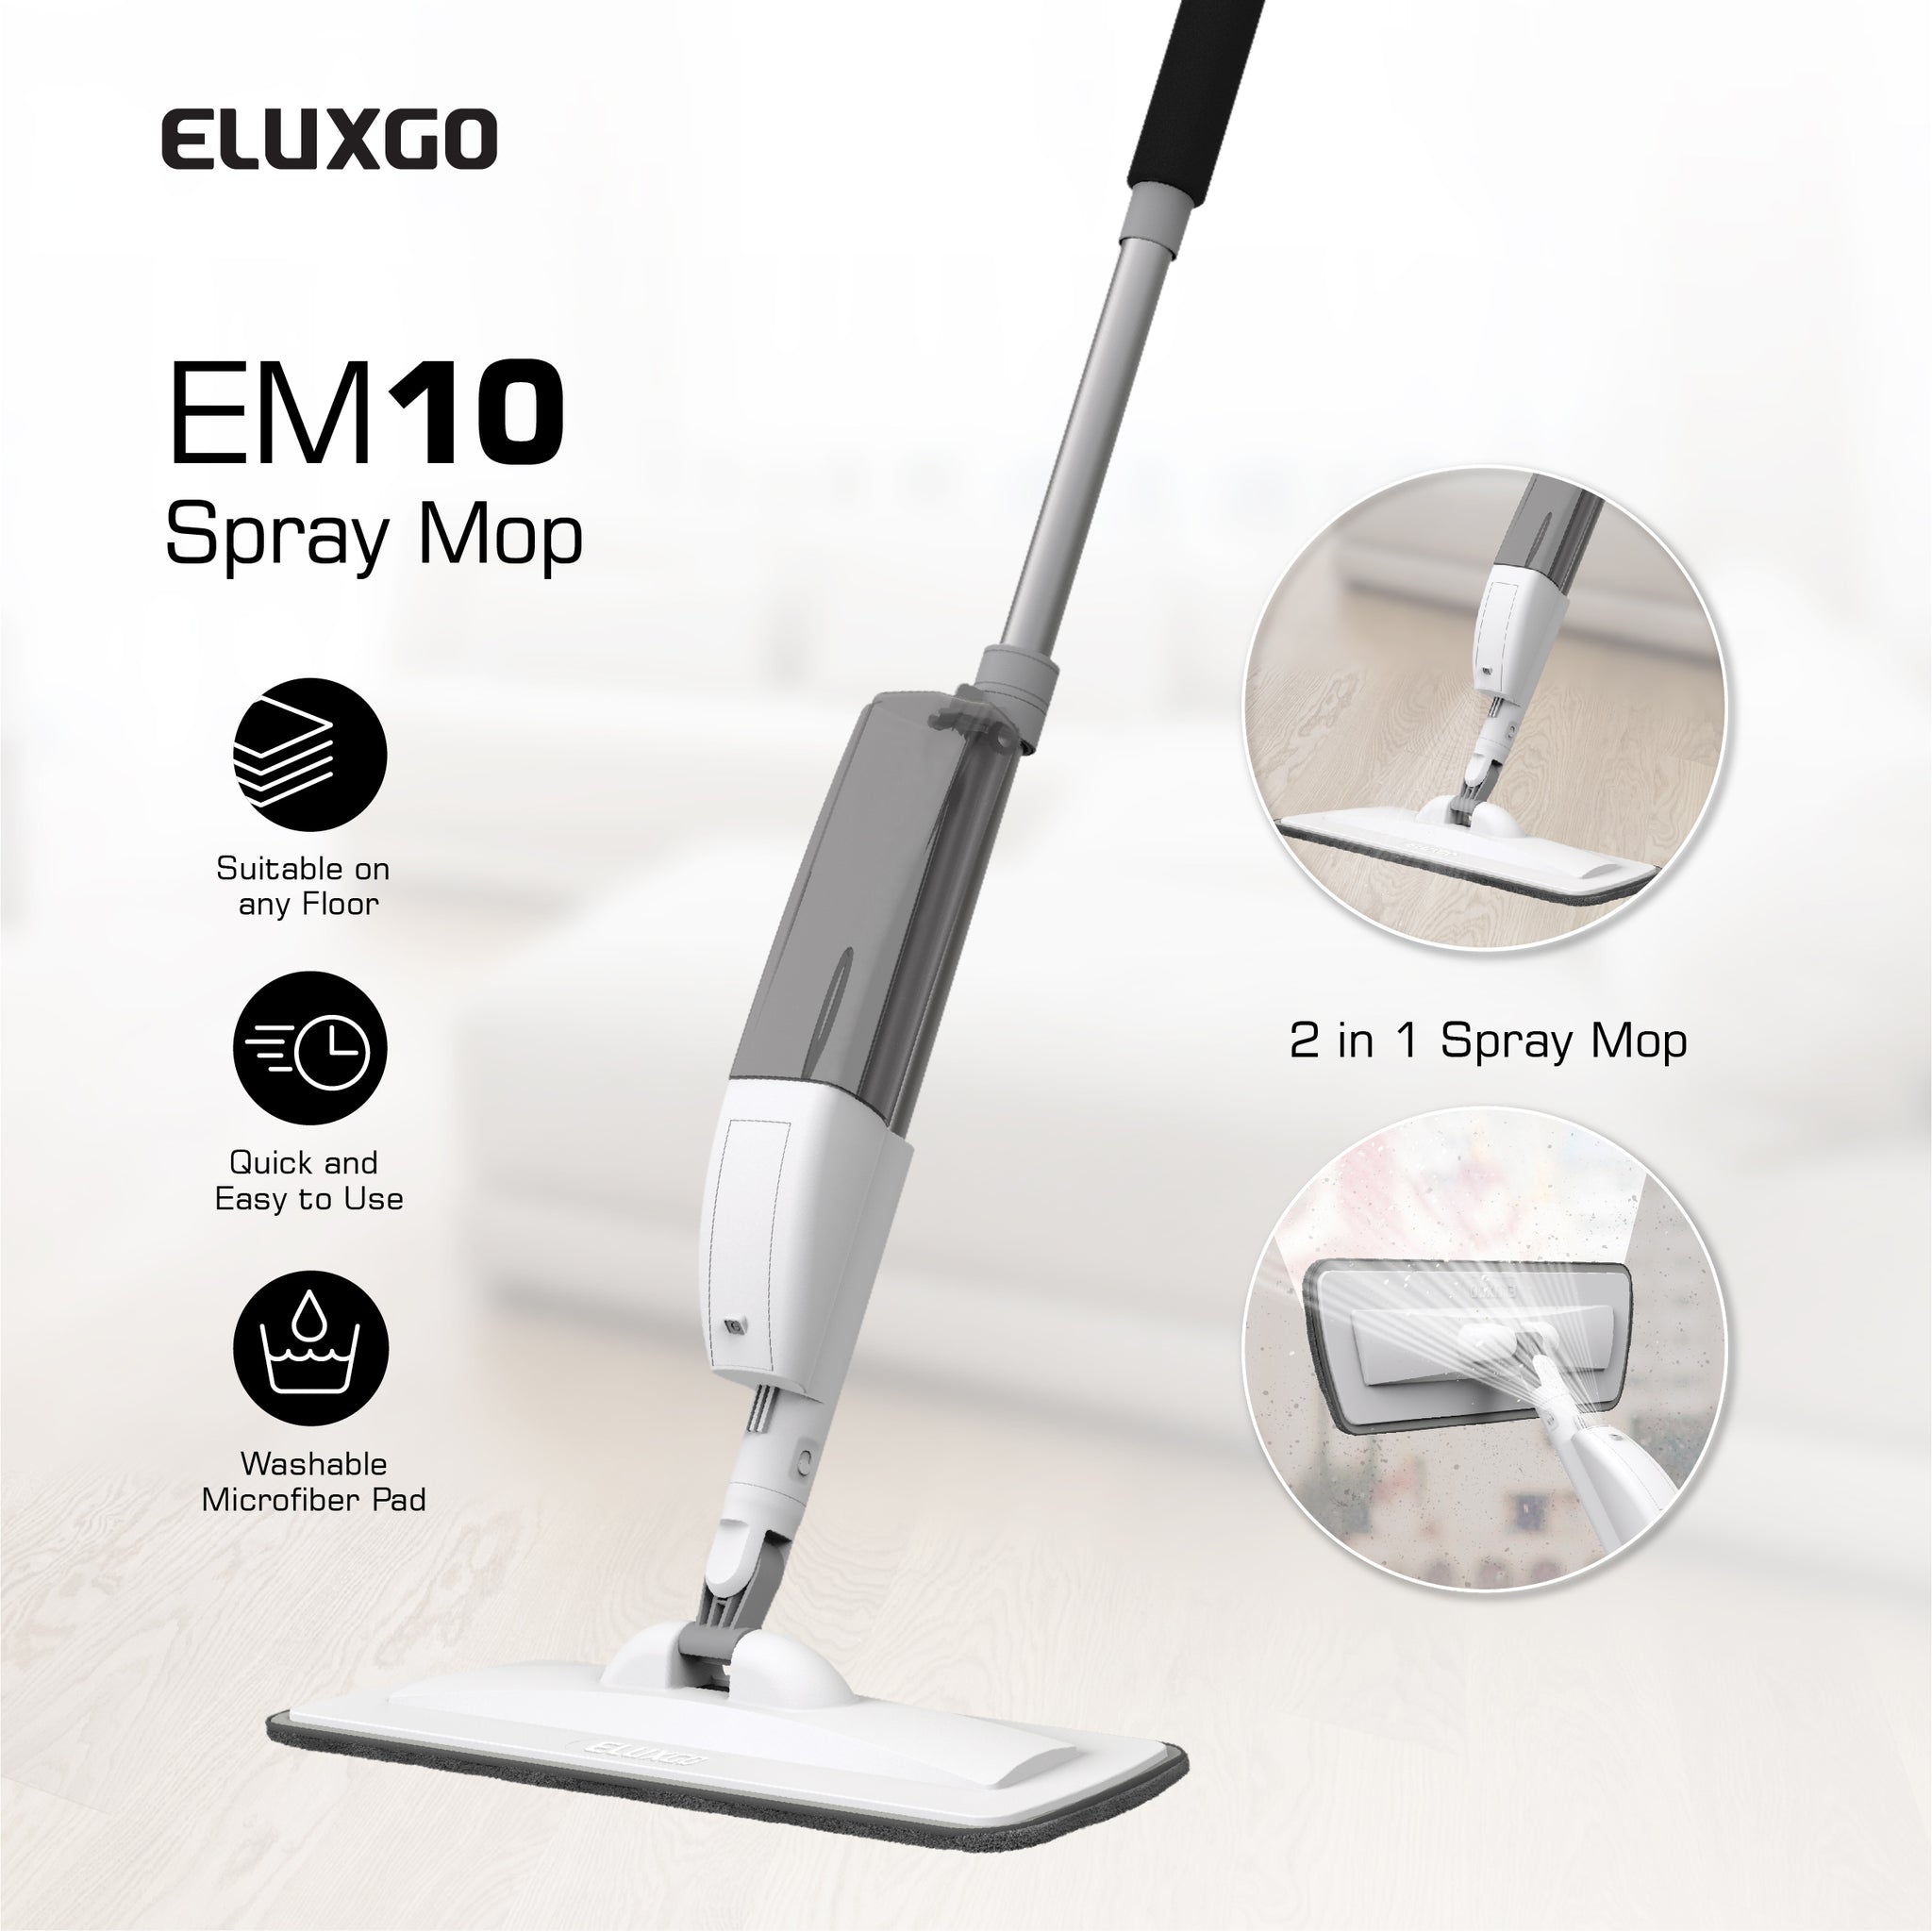 EM10 Spray mop that is suitable on any floor